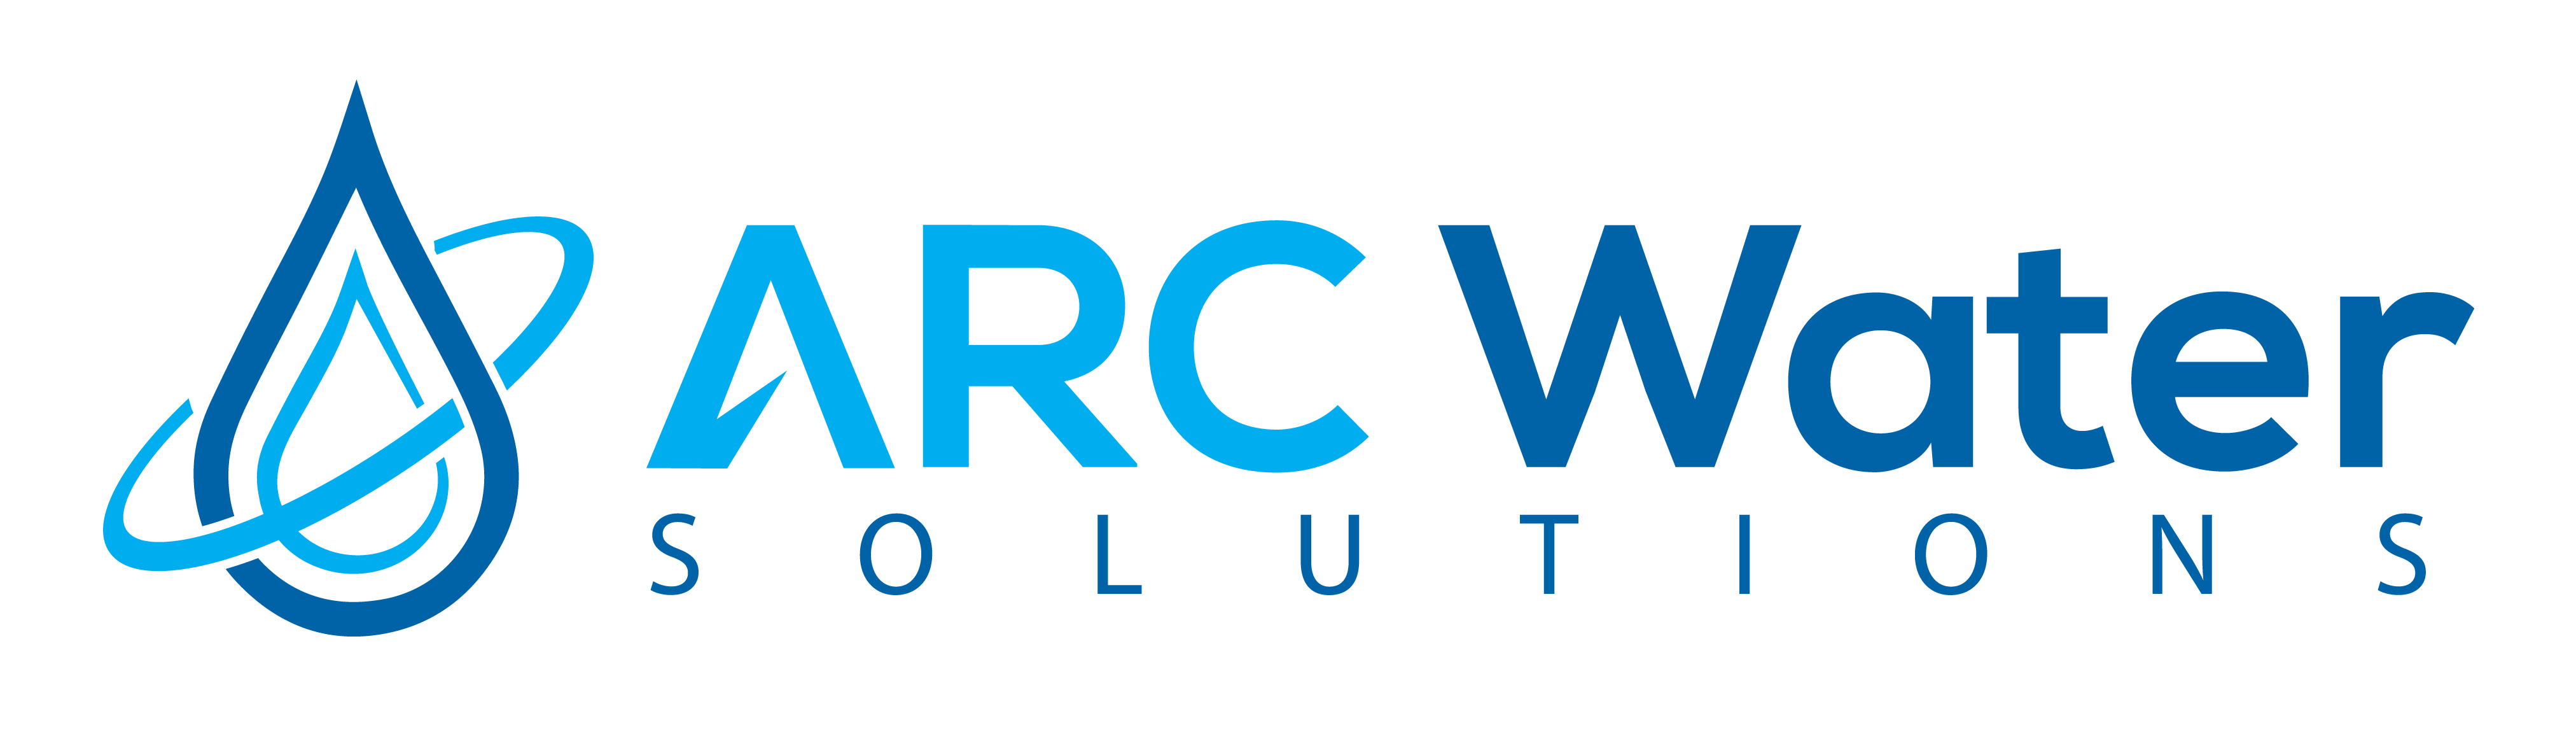 ARC Water Solutions